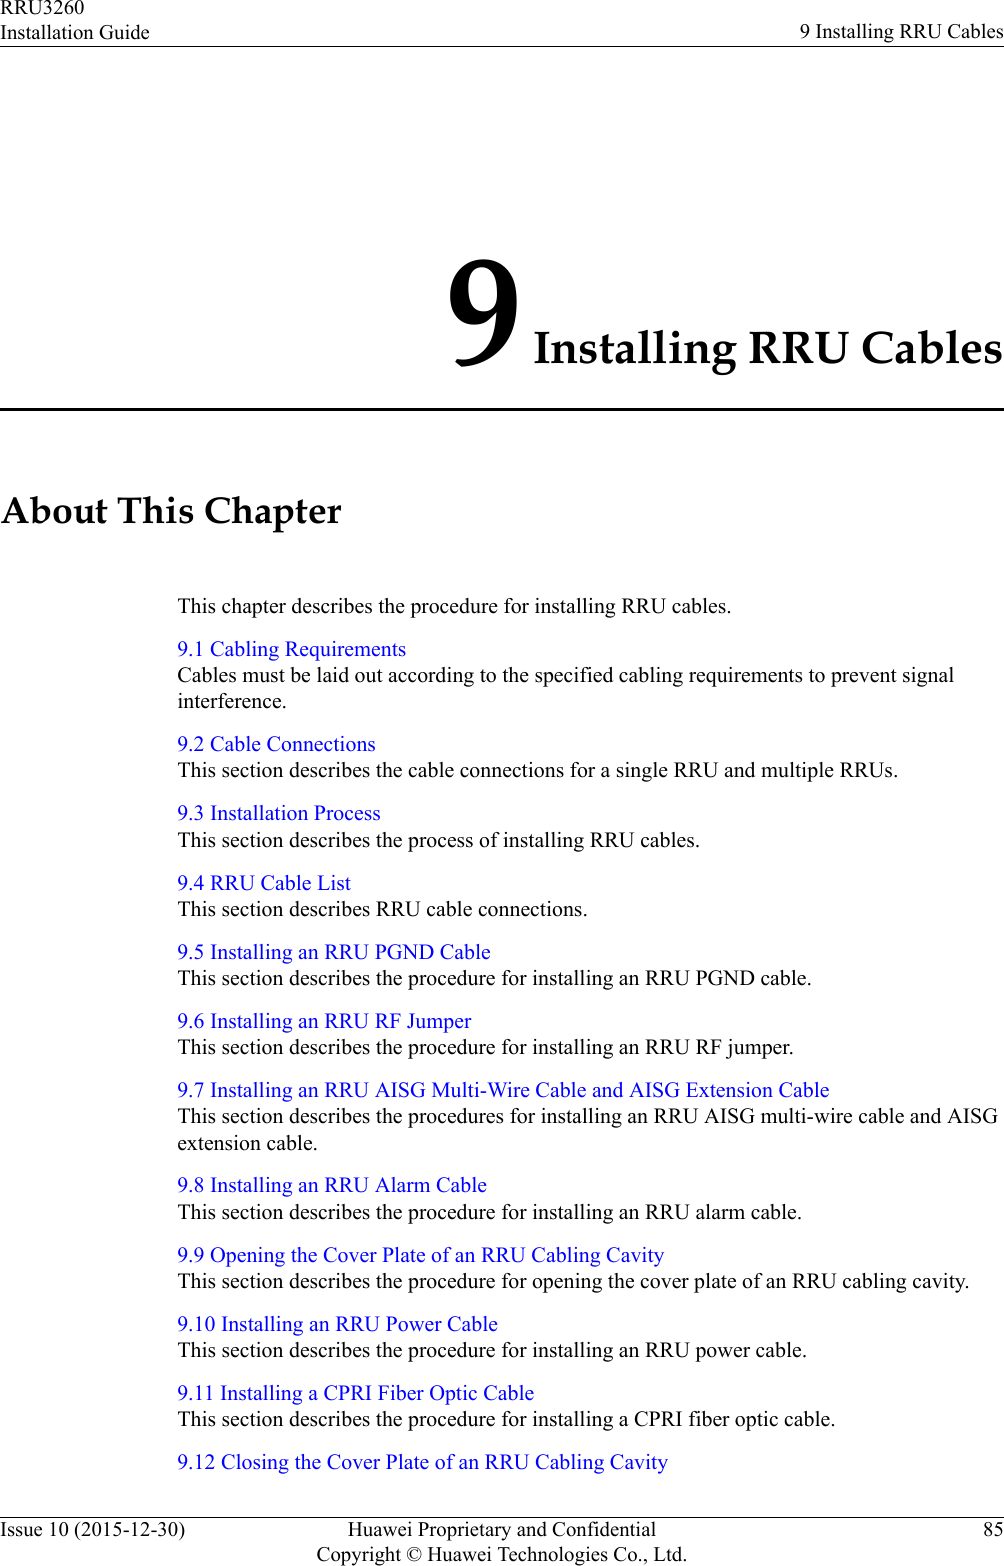 9 Installing RRU CablesAbout This ChapterThis chapter describes the procedure for installing RRU cables.9.1 Cabling RequirementsCables must be laid out according to the specified cabling requirements to prevent signalinterference.9.2 Cable ConnectionsThis section describes the cable connections for a single RRU and multiple RRUs.9.3 Installation ProcessThis section describes the process of installing RRU cables.9.4 RRU Cable ListThis section describes RRU cable connections.9.5 Installing an RRU PGND CableThis section describes the procedure for installing an RRU PGND cable.9.6 Installing an RRU RF JumperThis section describes the procedure for installing an RRU RF jumper.9.7 Installing an RRU AISG Multi-Wire Cable and AISG Extension CableThis section describes the procedures for installing an RRU AISG multi-wire cable and AISGextension cable.9.8 Installing an RRU Alarm CableThis section describes the procedure for installing an RRU alarm cable.9.9 Opening the Cover Plate of an RRU Cabling CavityThis section describes the procedure for opening the cover plate of an RRU cabling cavity.9.10 Installing an RRU Power CableThis section describes the procedure for installing an RRU power cable.9.11 Installing a CPRI Fiber Optic CableThis section describes the procedure for installing a CPRI fiber optic cable.9.12 Closing the Cover Plate of an RRU Cabling CavityRRU3260Installation Guide 9 Installing RRU CablesIssue 10 (2015-12-30) Huawei Proprietary and ConfidentialCopyright © Huawei Technologies Co., Ltd.85